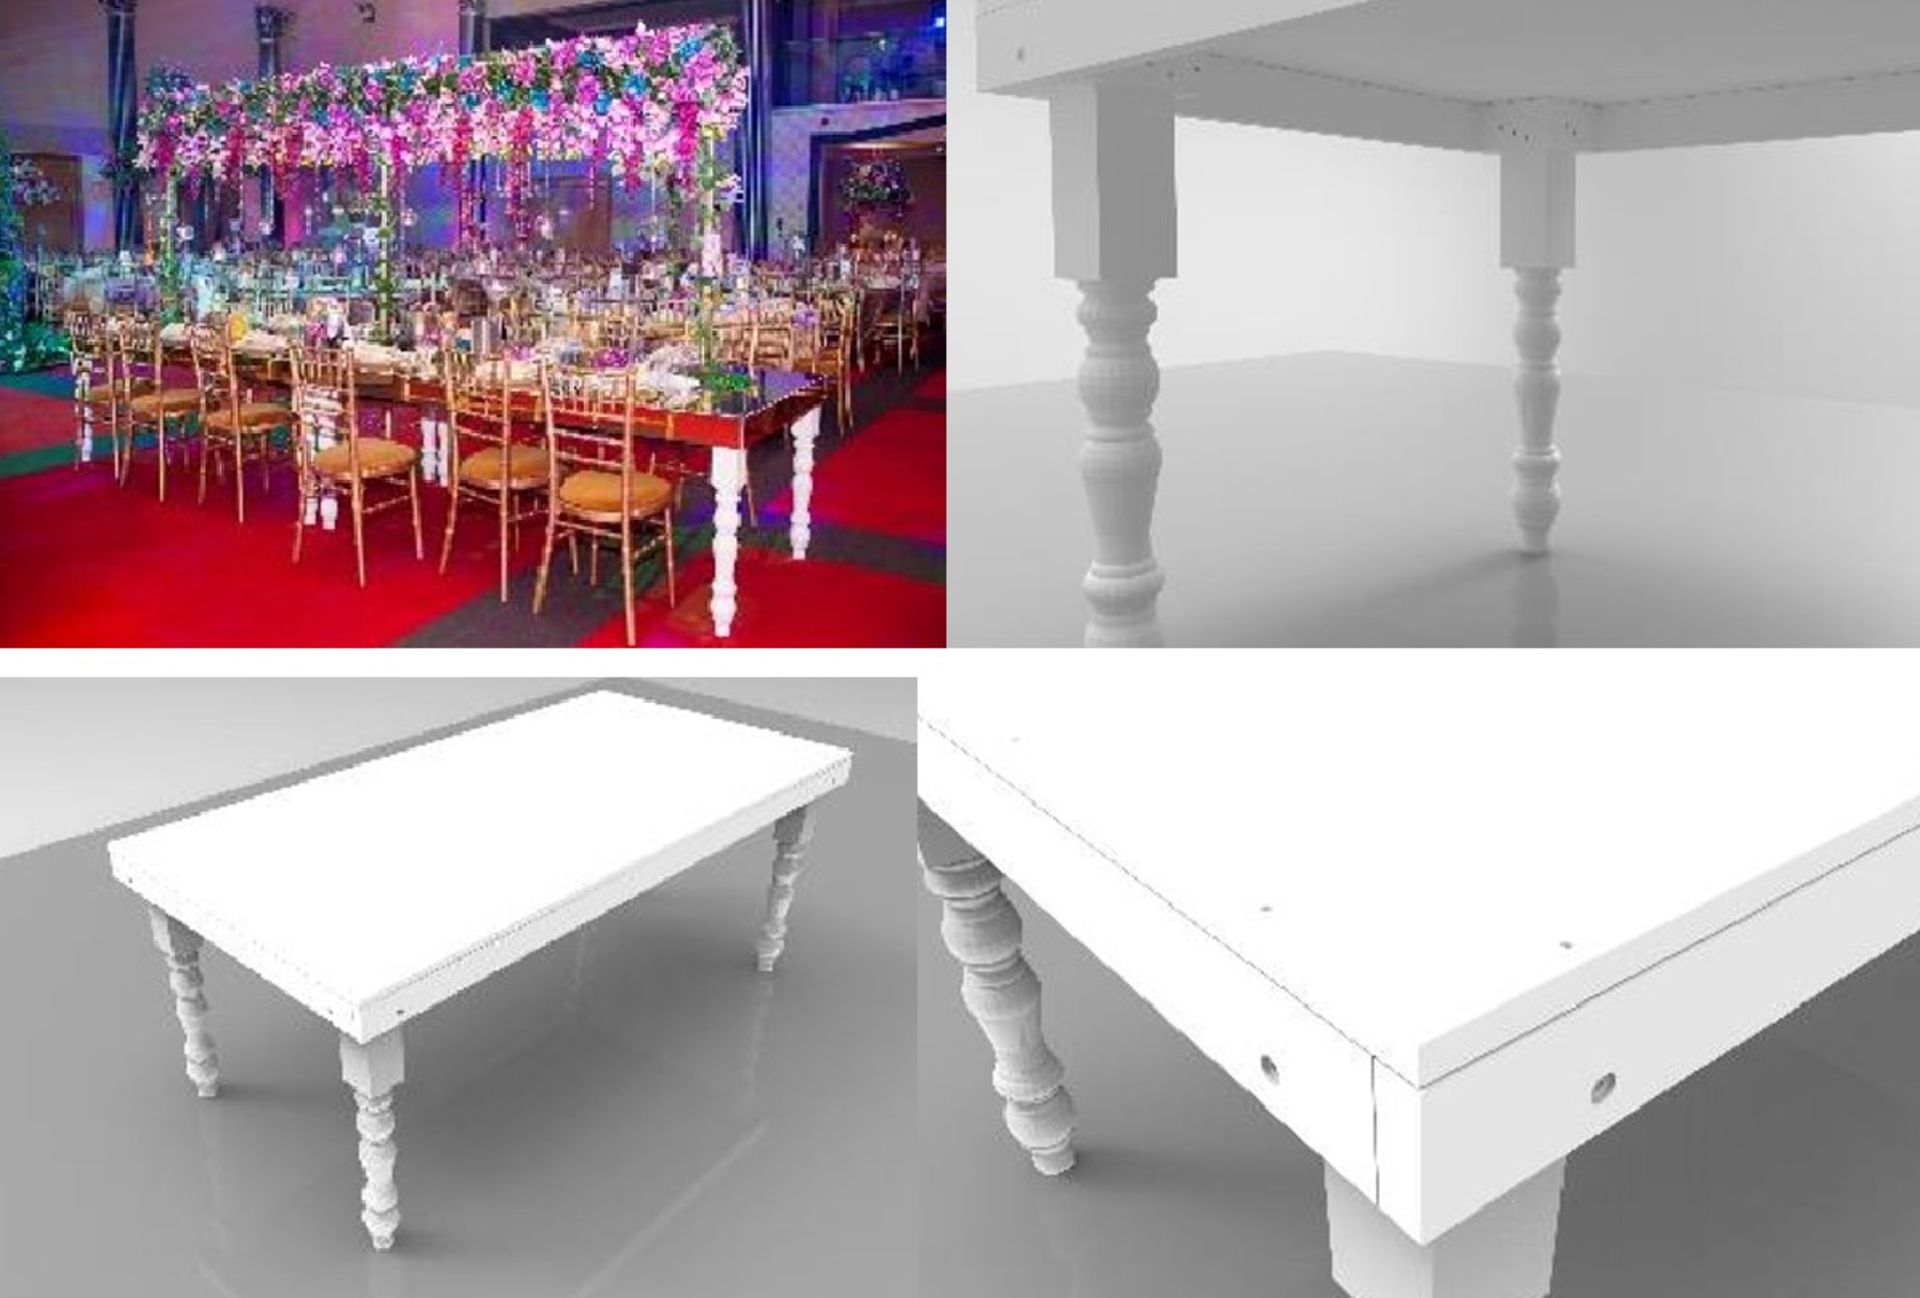 5 x Bespoke Rectangular Commercial Event / Dining Tables In White - Dimensions: 198cm x D99 x H74cm